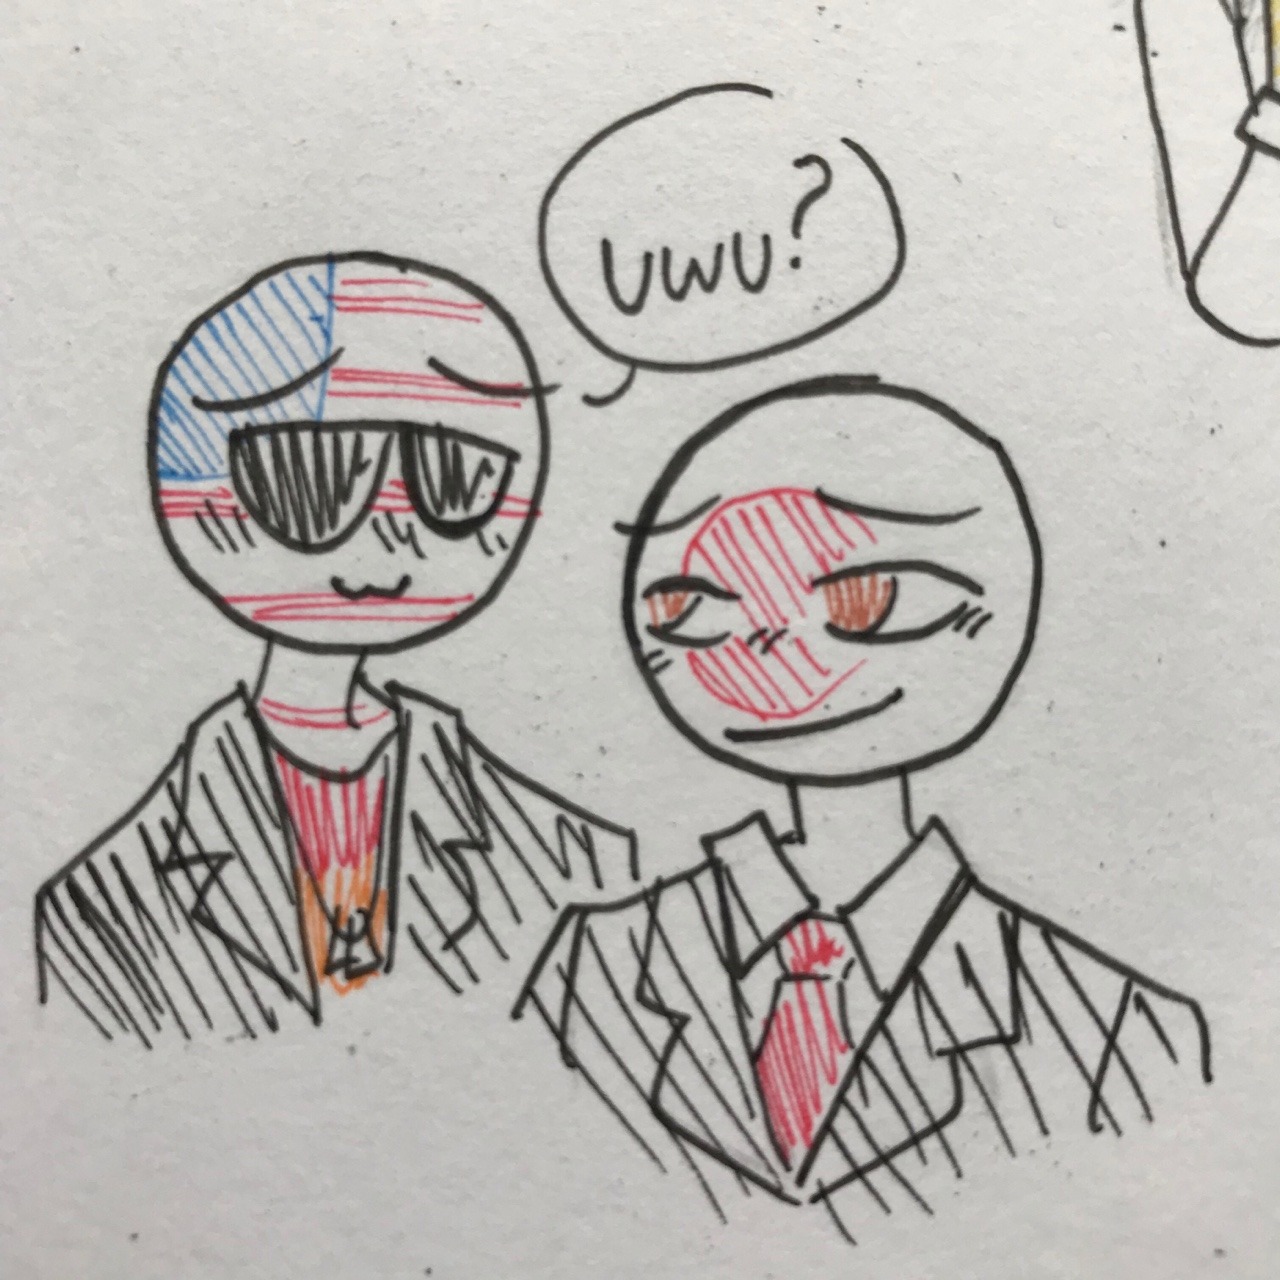 Lost Countryhumans Lost Russia x Lost America Fanfiction